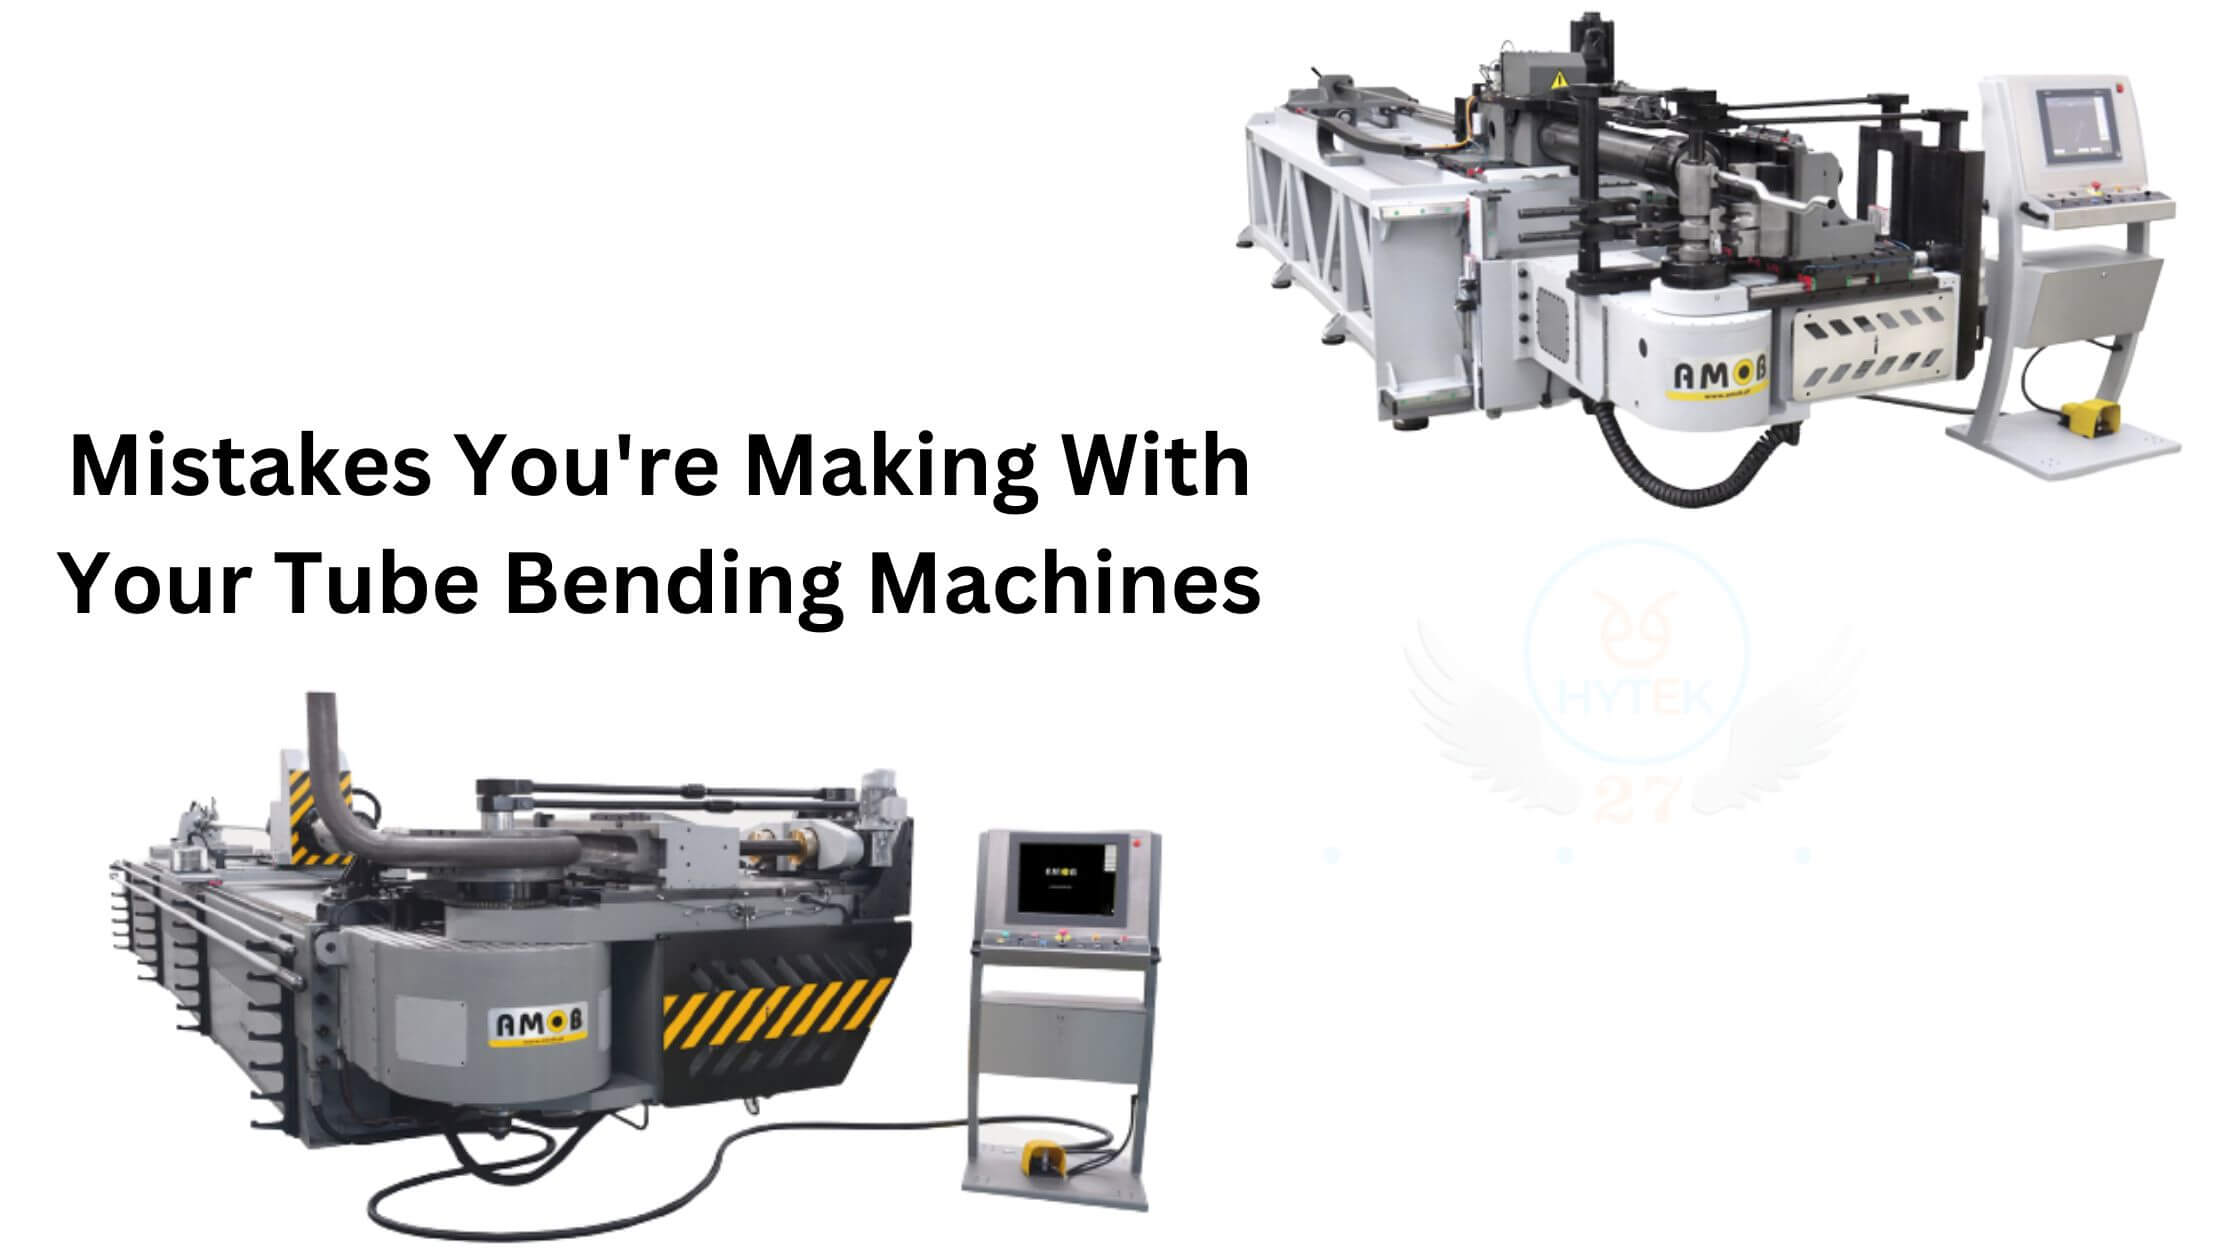 Mistakes You're Making With Your Tube Bending Machines